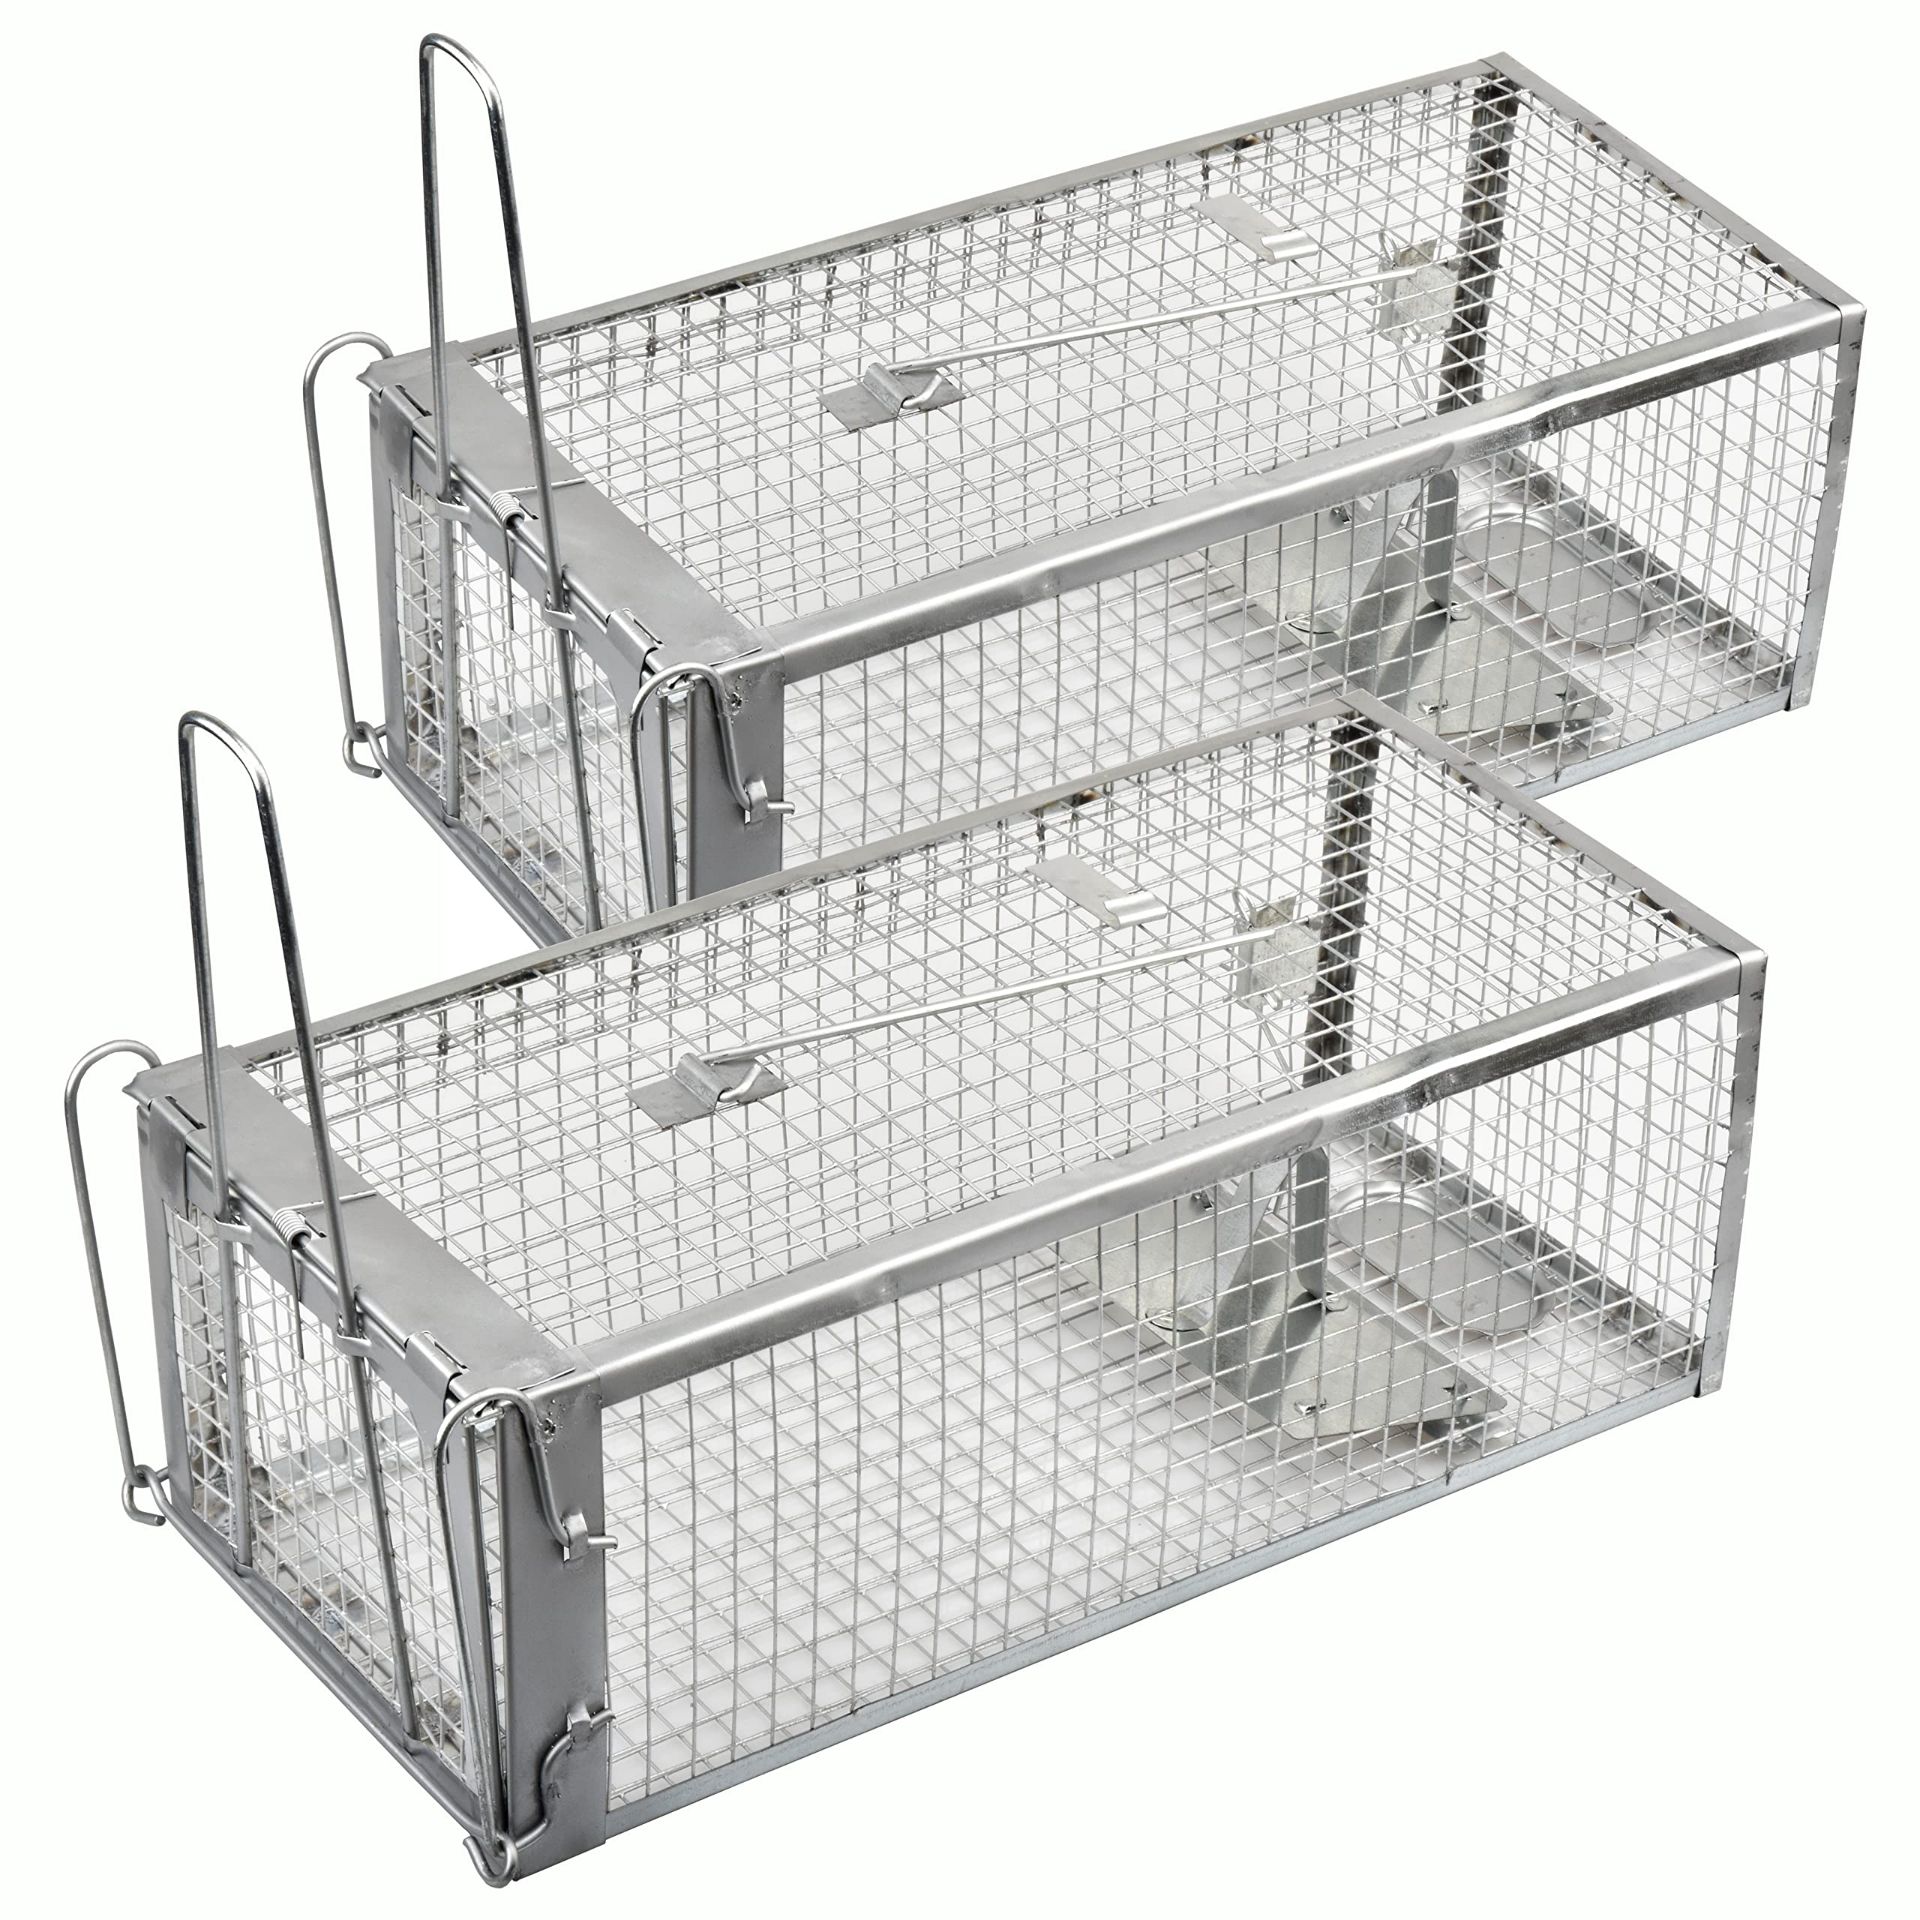 RRP £31.95 Anyhall 2-Pack Rat Traps Humane Live Mouse Cage Traps (Silver)